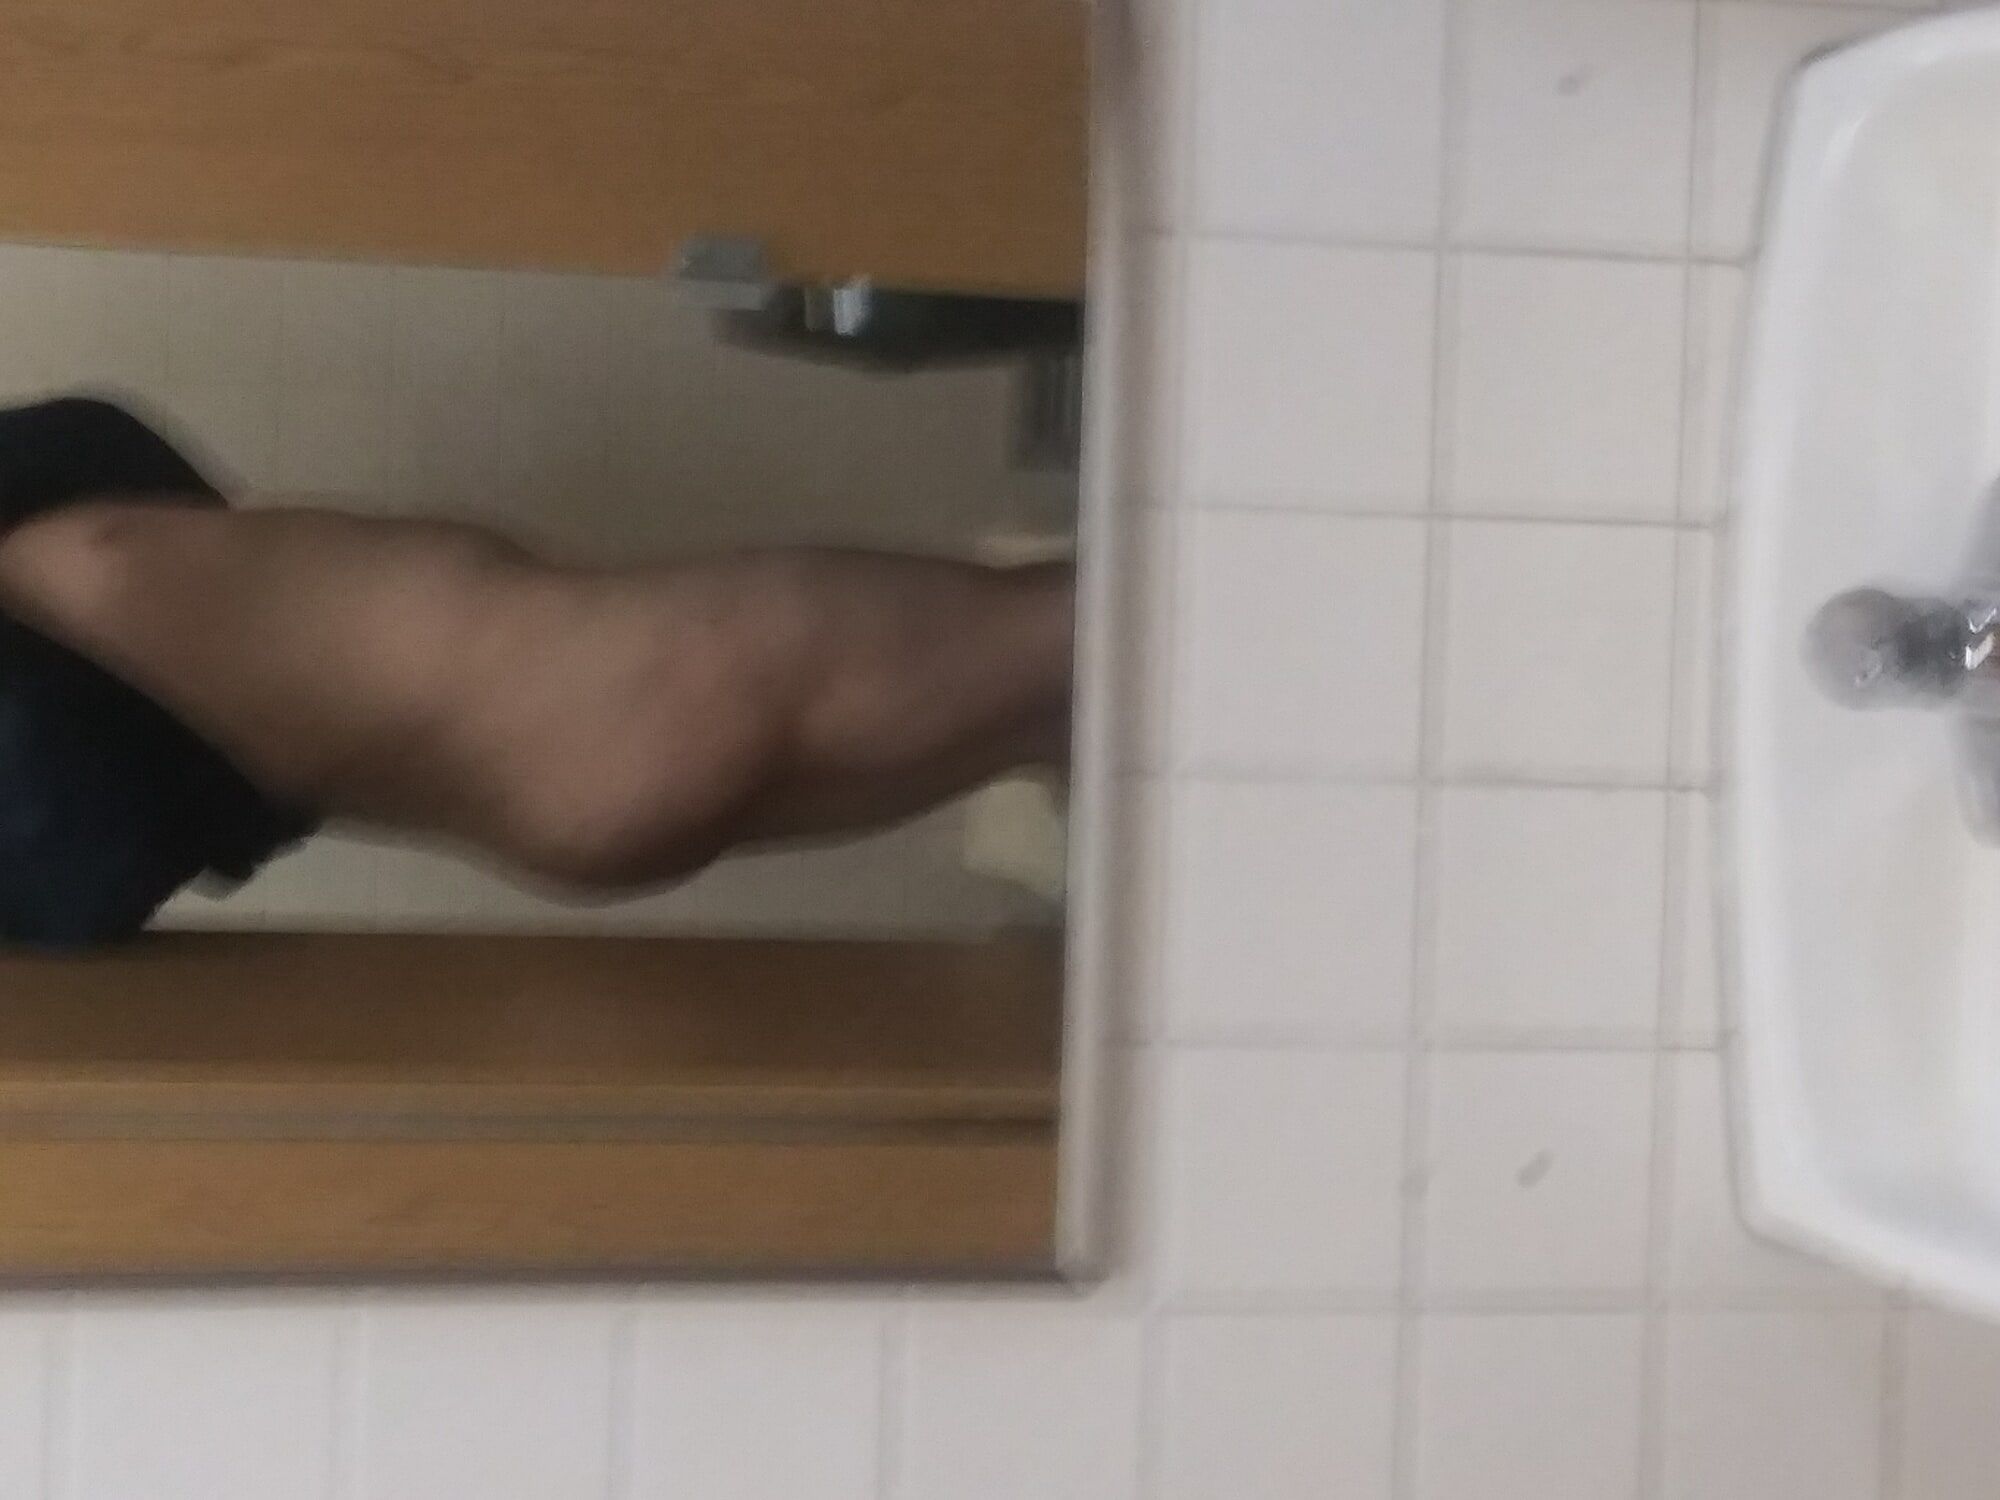 Public Restroom Ass and Cock #7